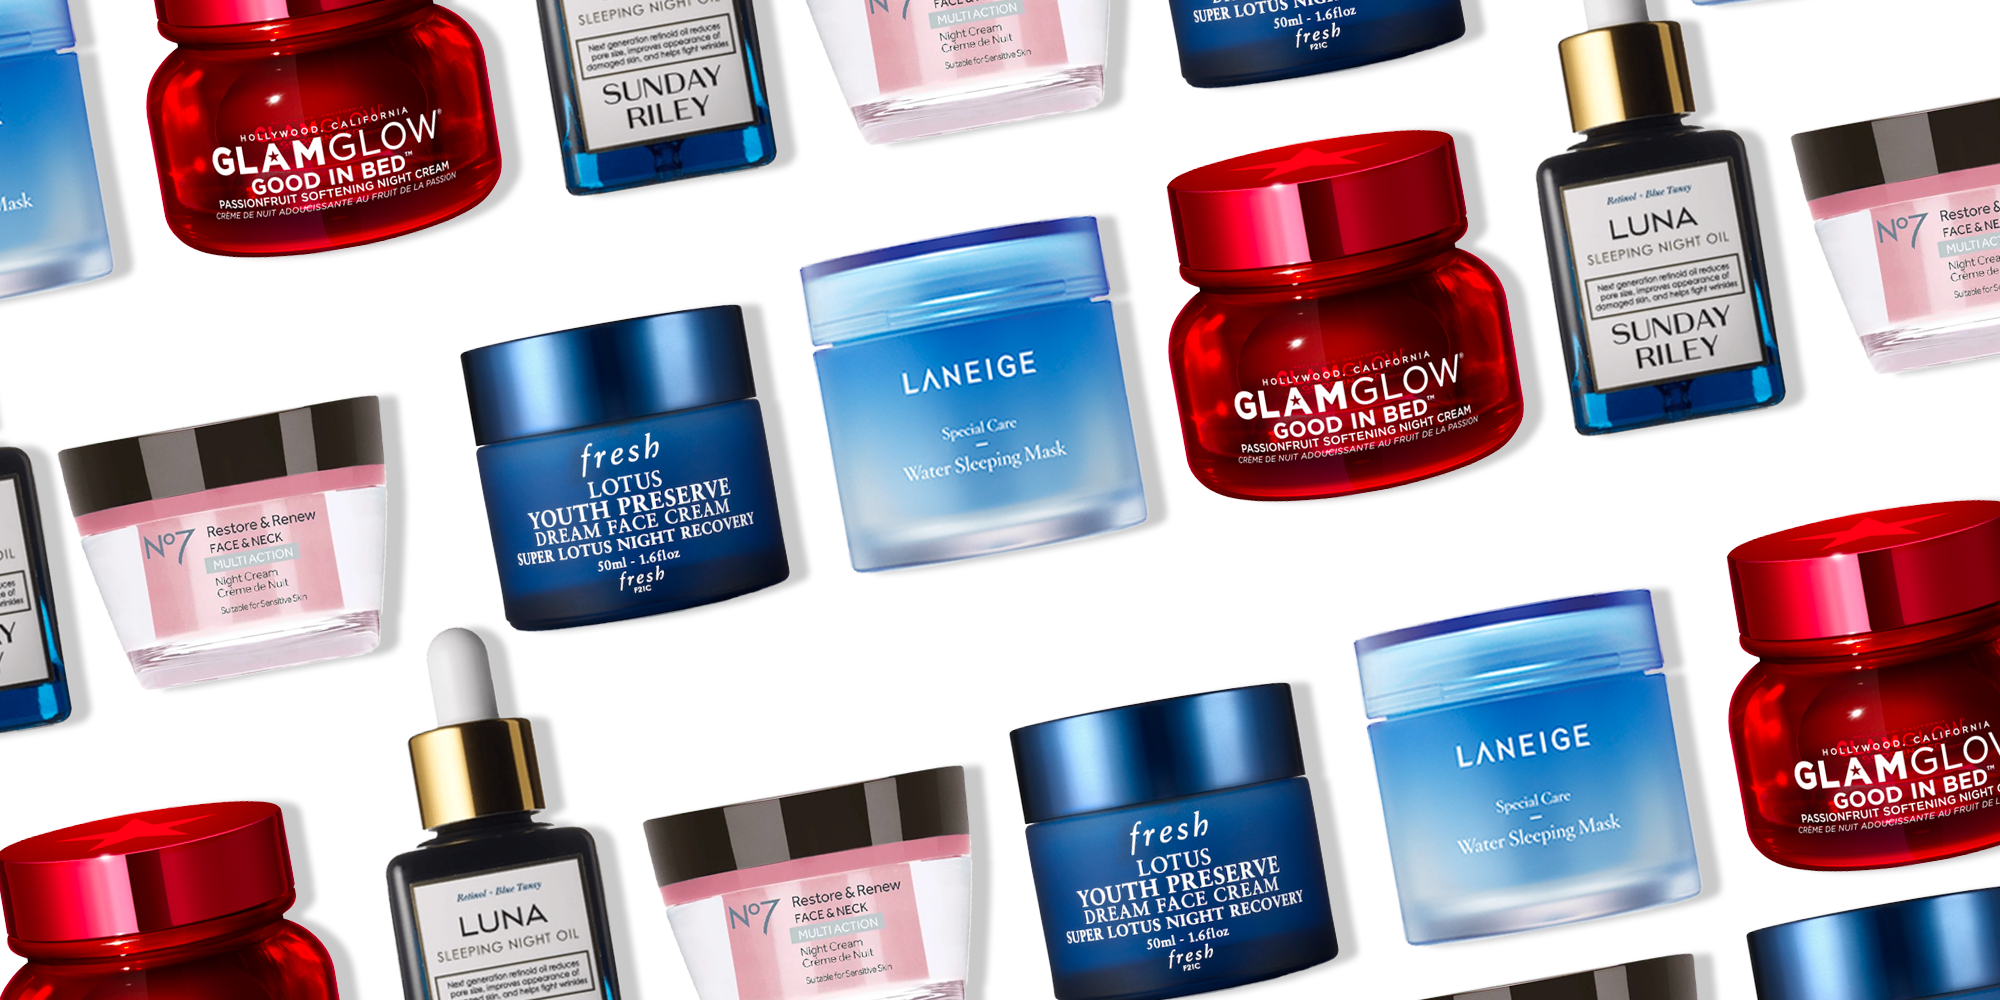 best face cream products